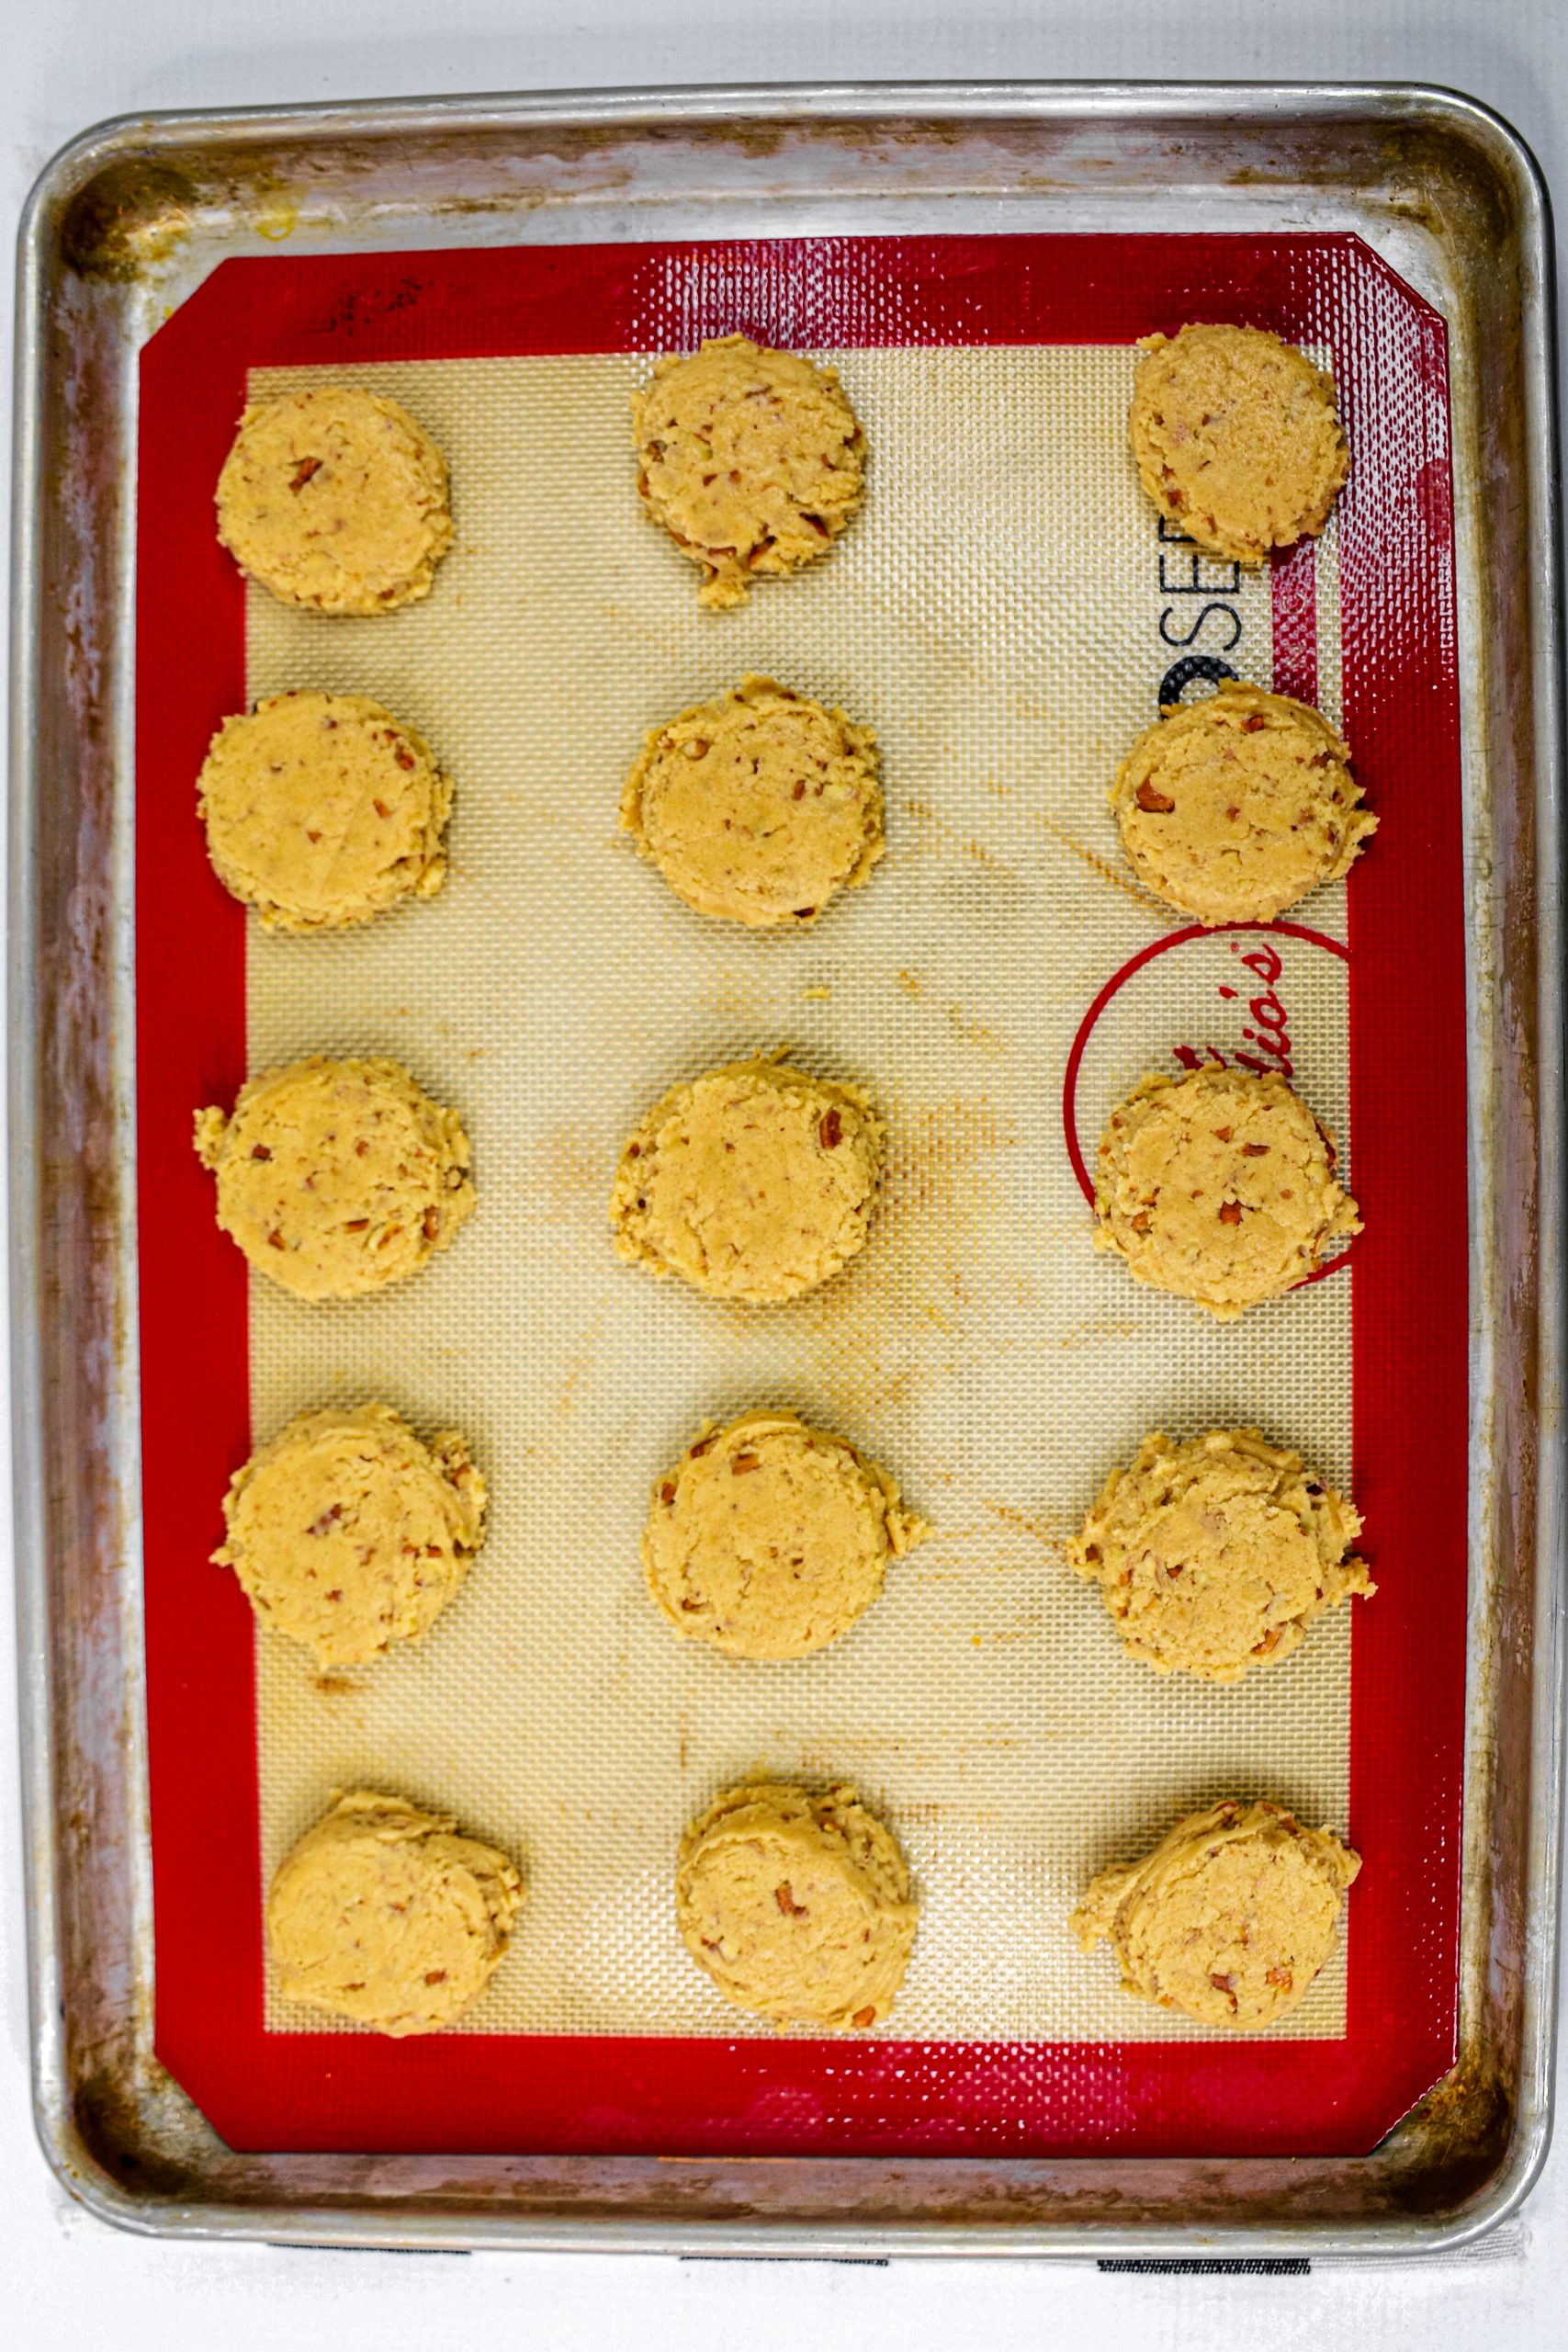 Using a small cookie scoop, scoop dough out onto the cookie sheets. Bake until golden brown, about 10 to 15 minutes.